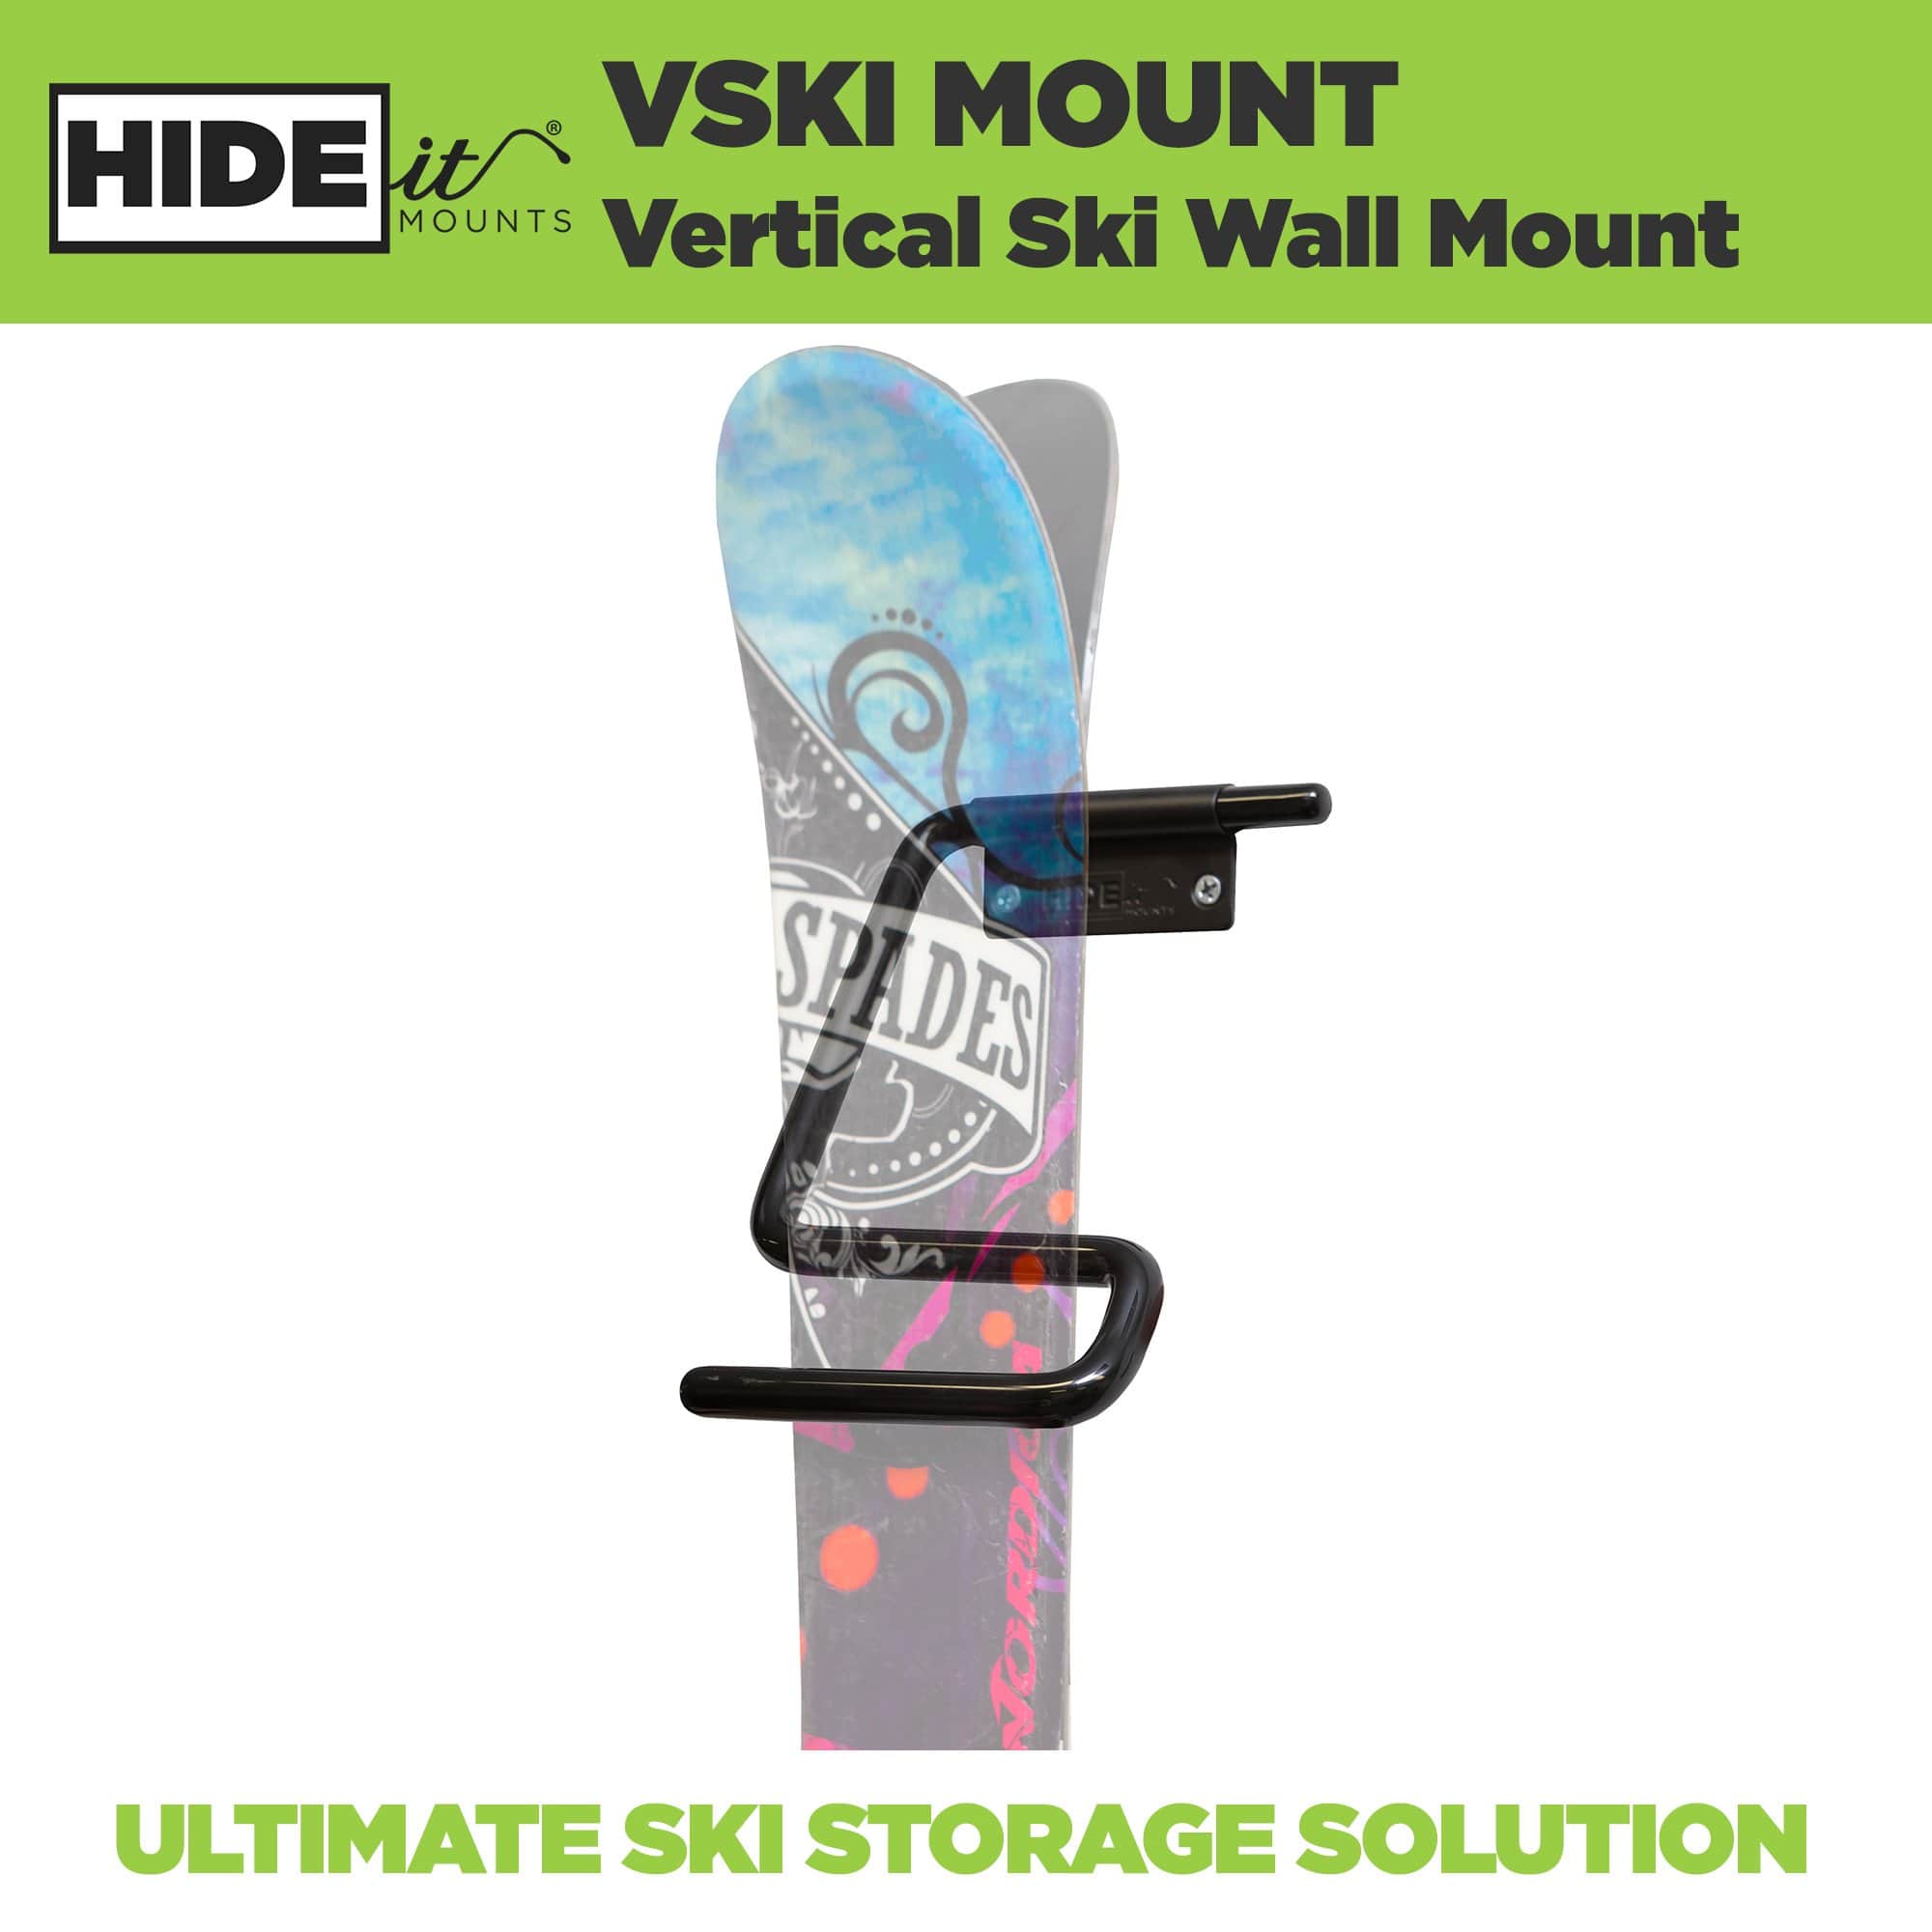 Pair of greyed out skis mounted in the HIDEit Vertical Ski Wall Mount. Ultimate ski storage solution - perfect for garage storage.